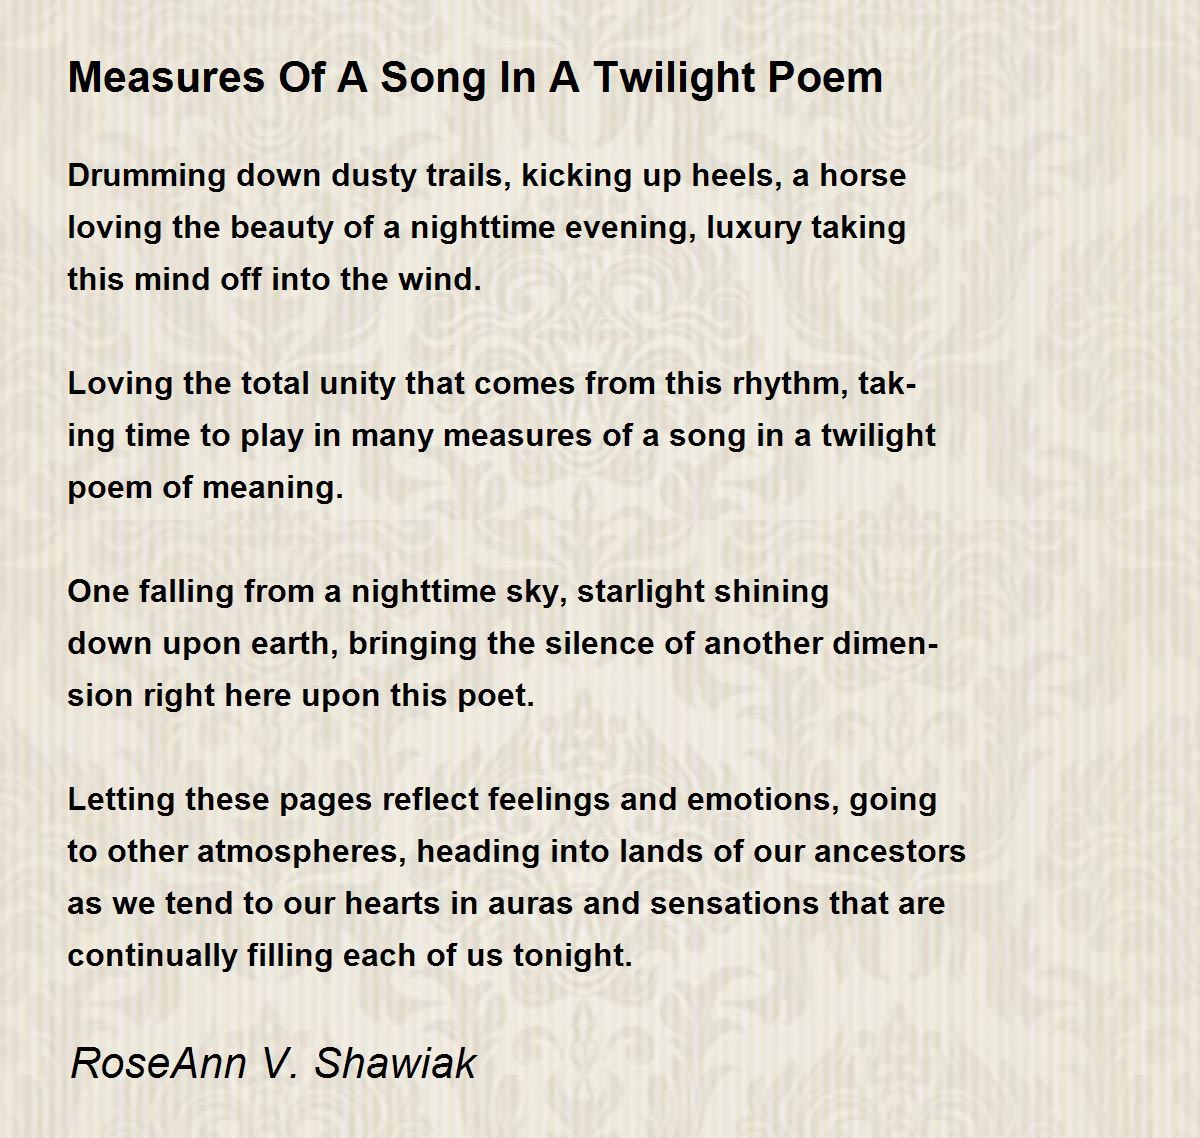 measures of a song in a twilight poem